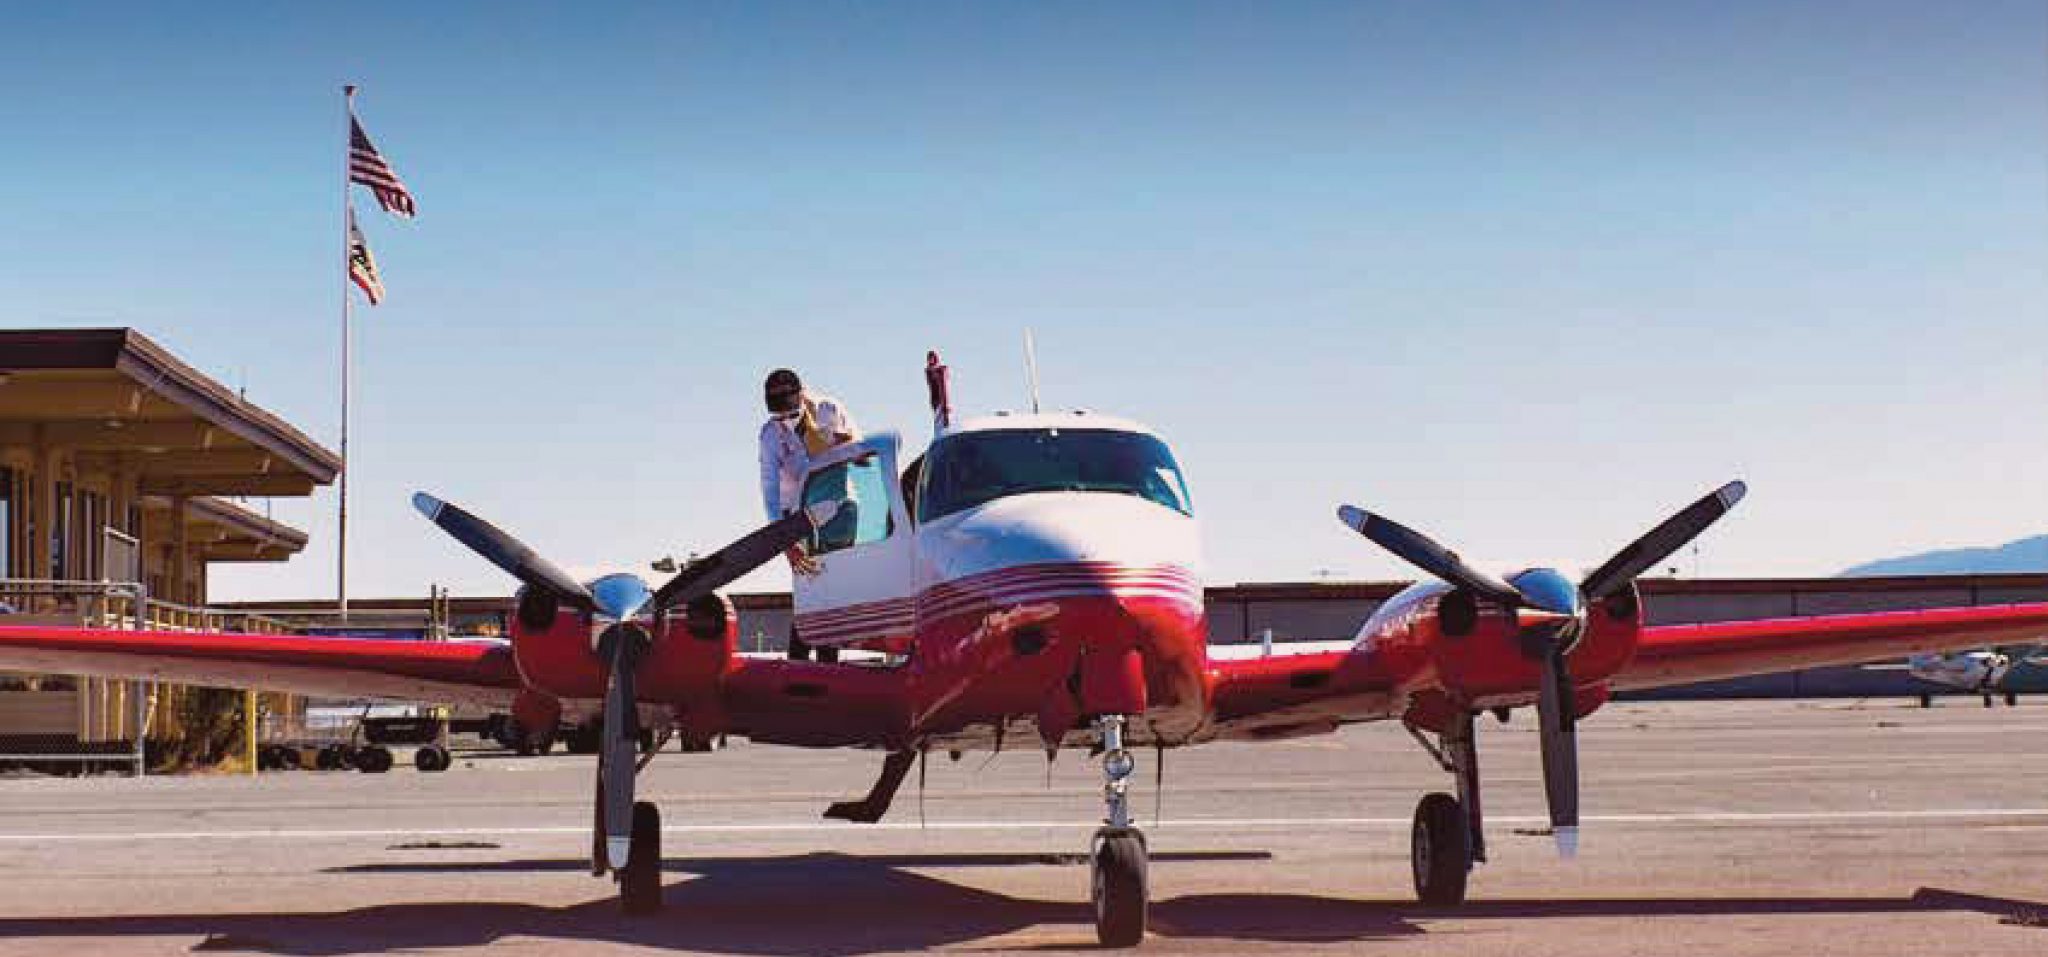 designed to introduce young aspiring aviation enthusiasts to careers in aviation.